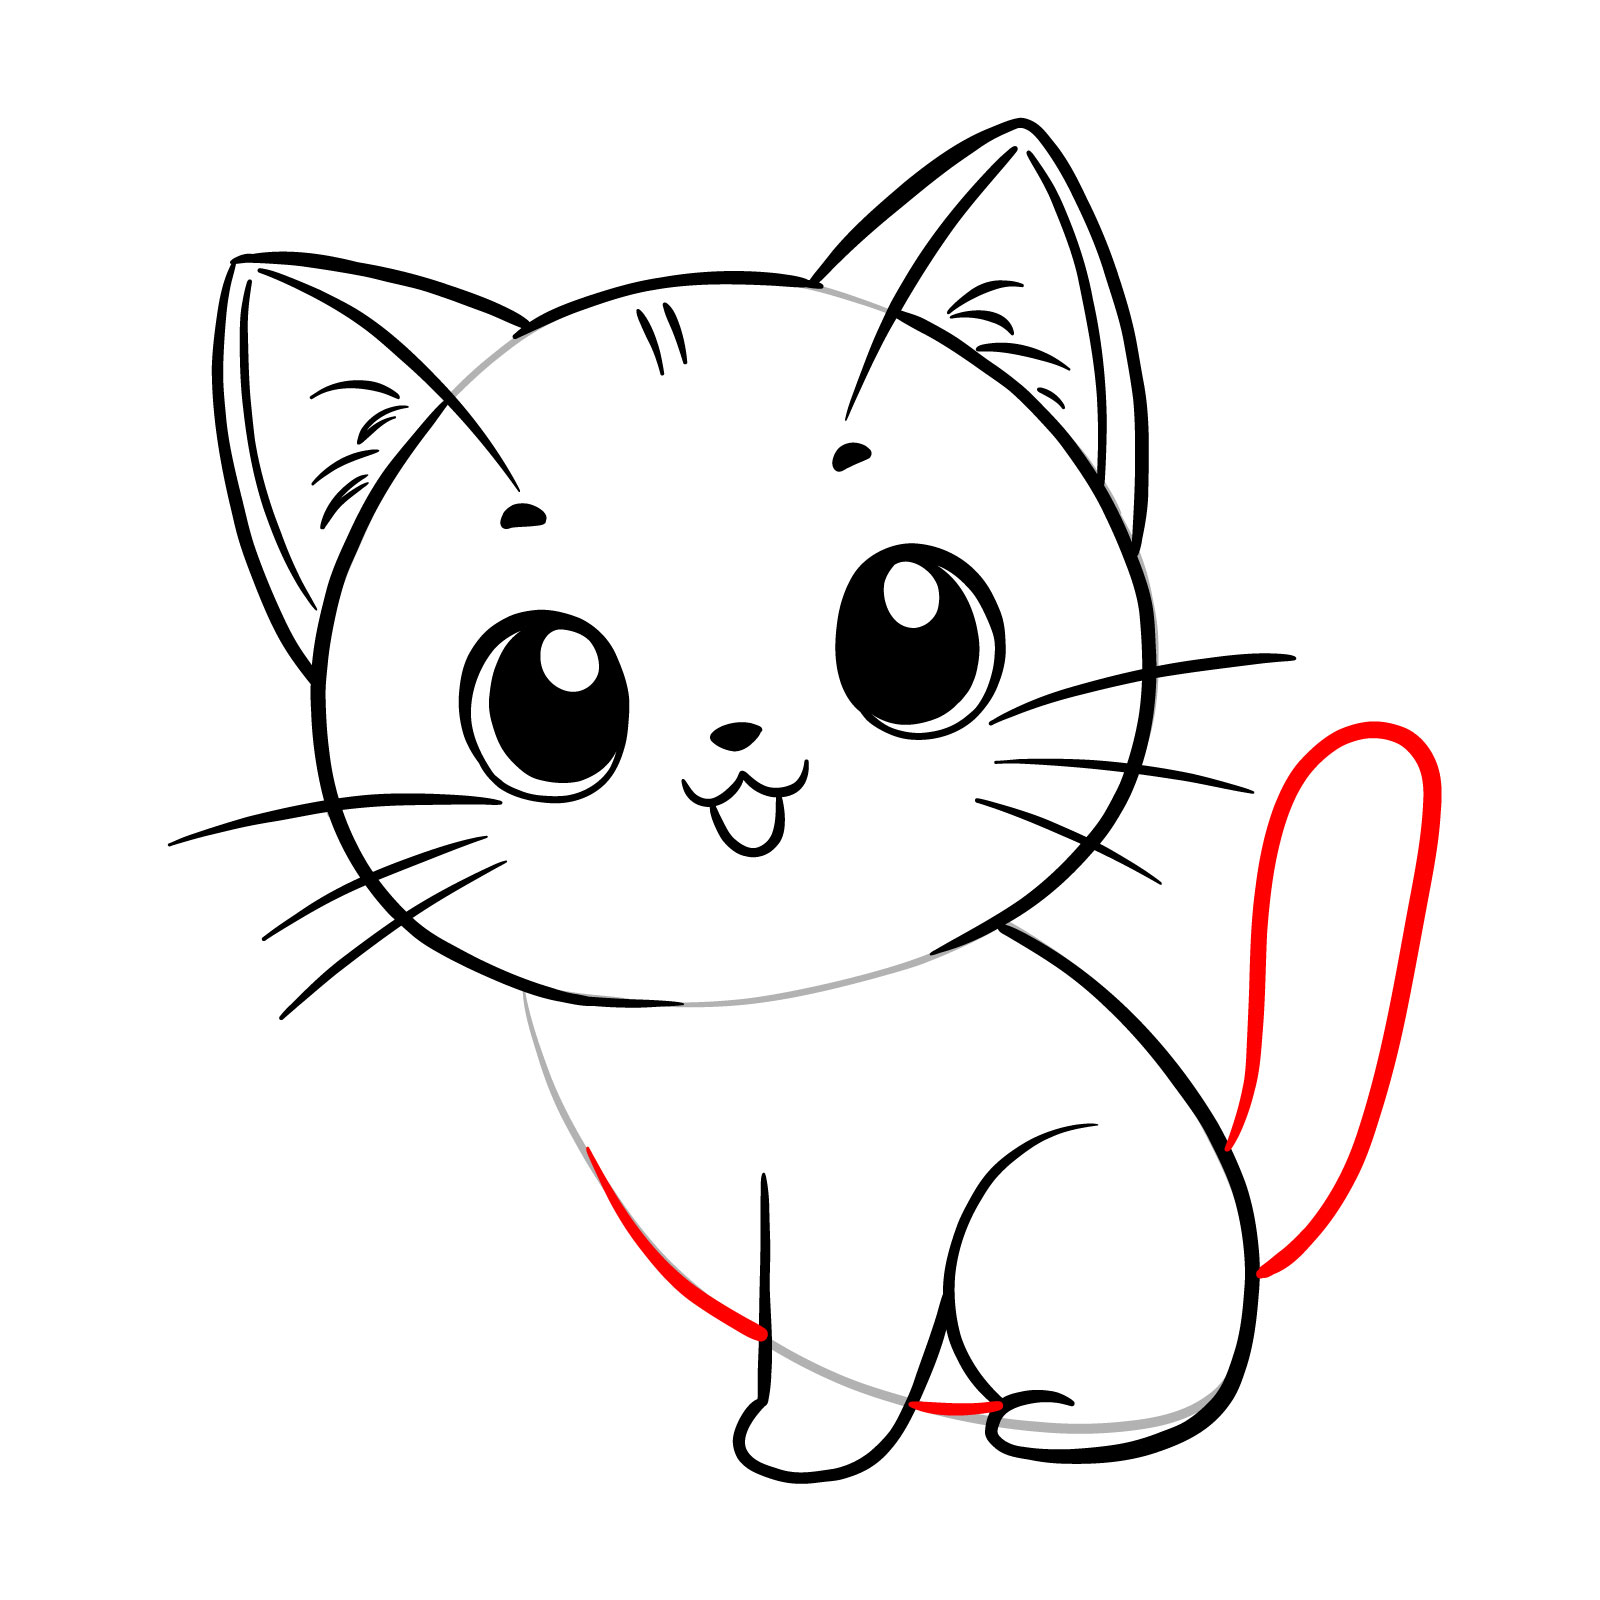 How to draw an anime cat - step 09